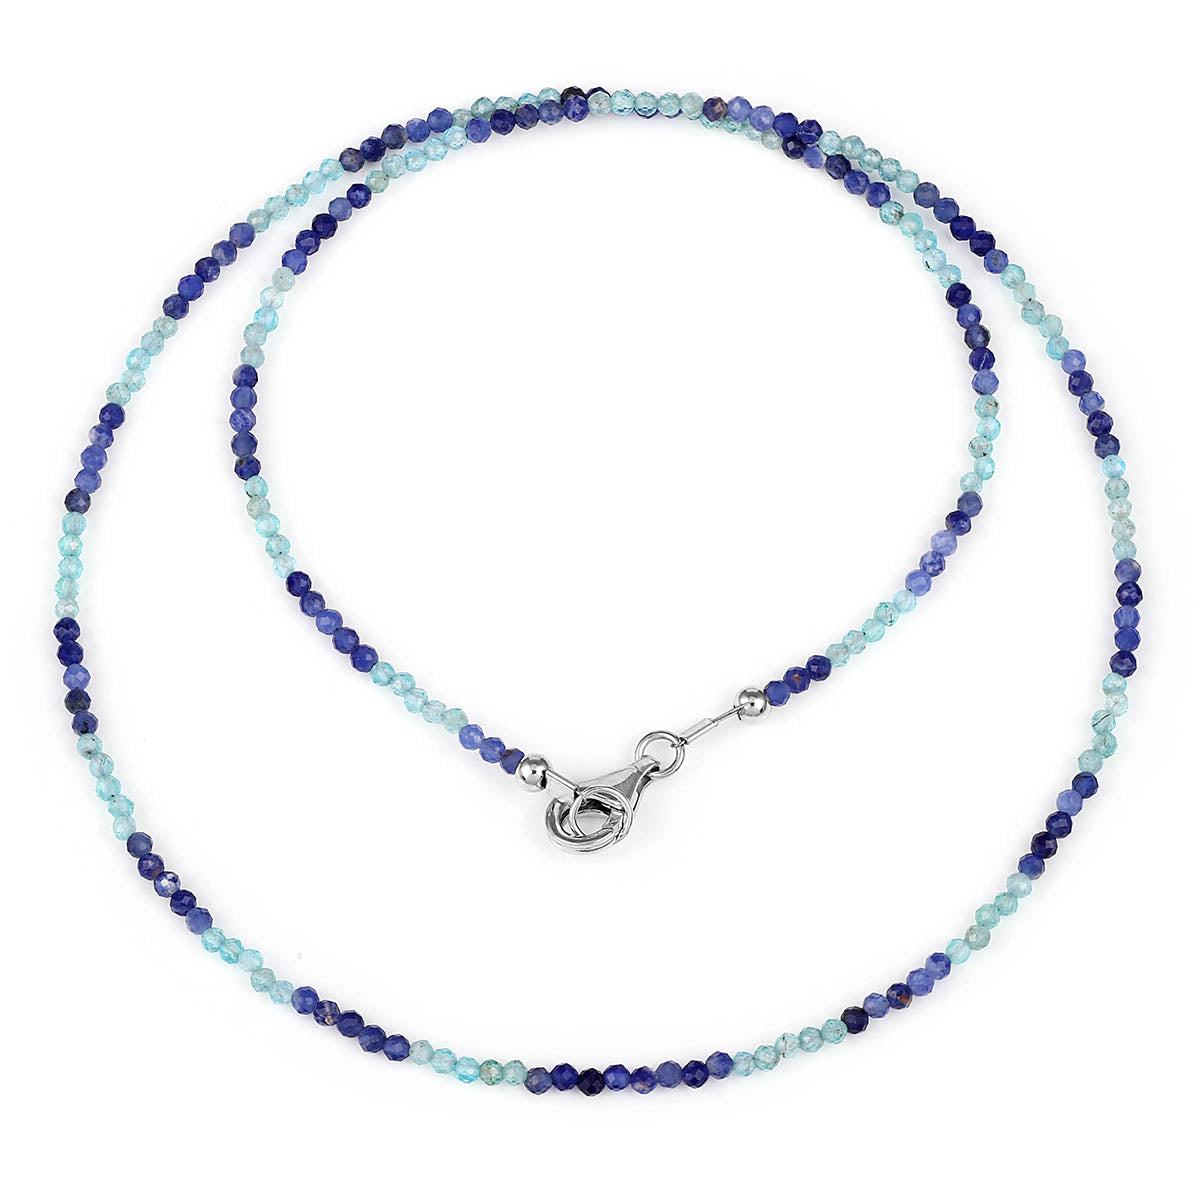 Sodalite and Apatite Choker Necklace